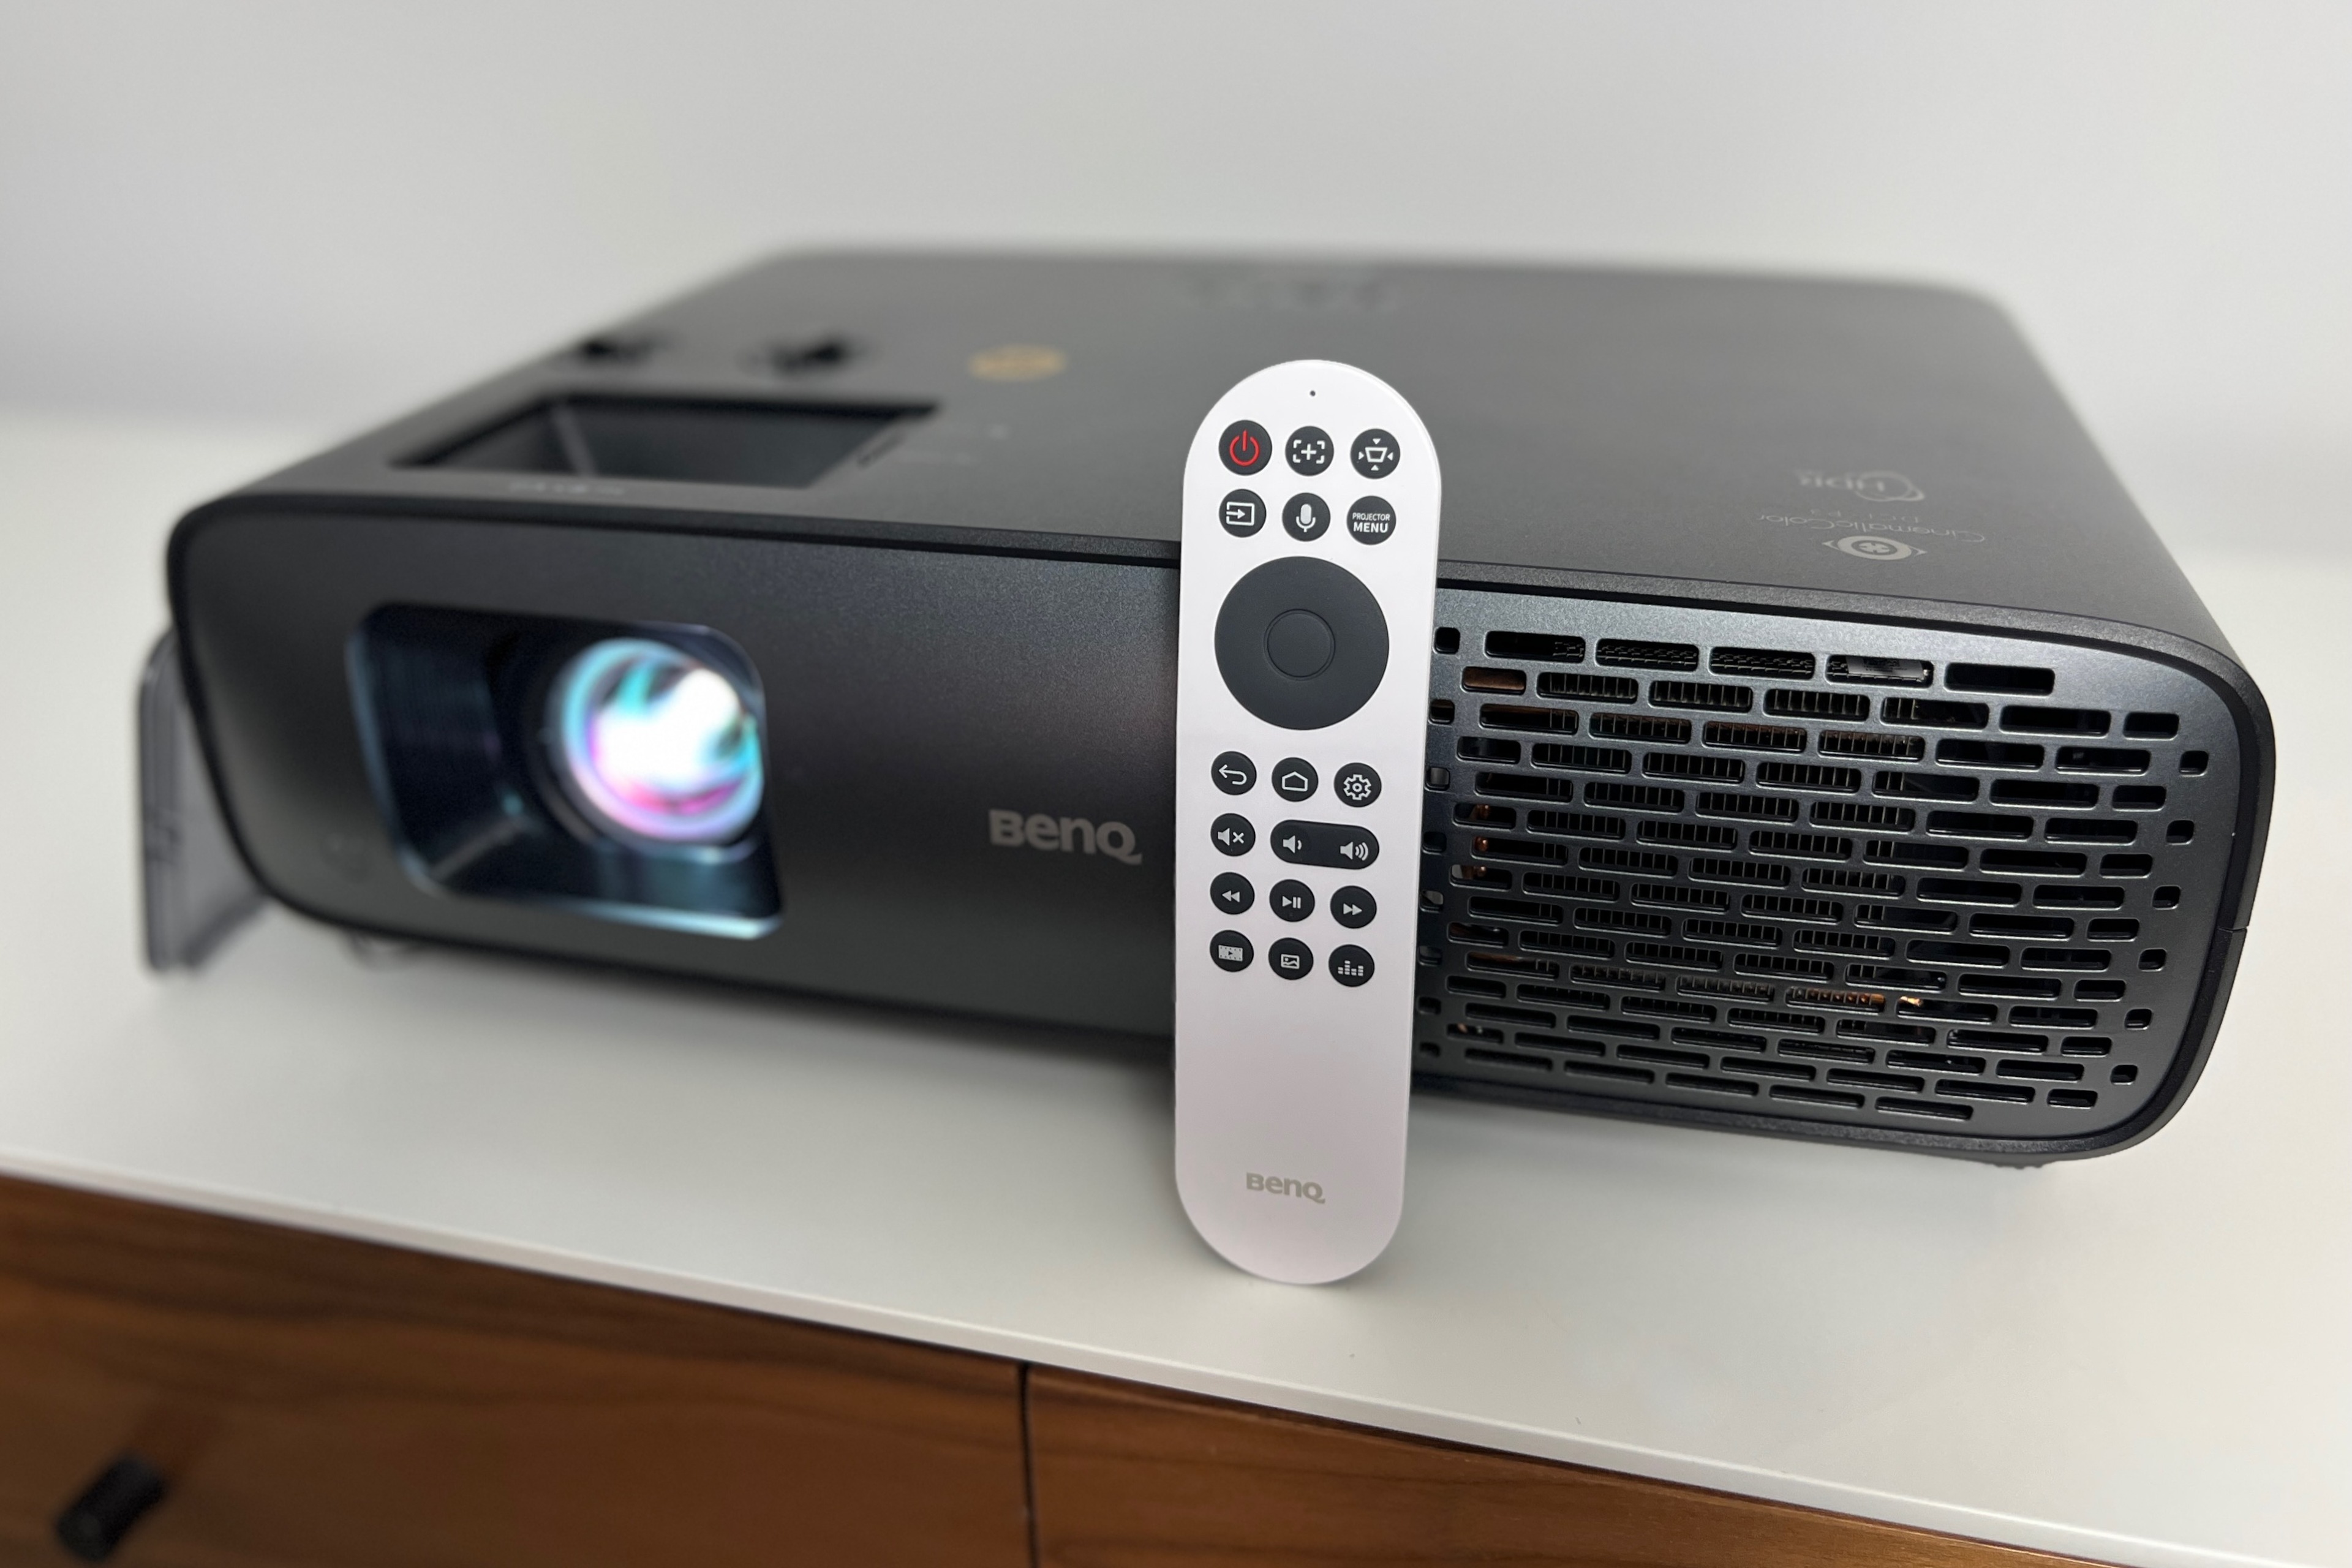 The BenQ 4550i 4K projector with the Android TV remote.